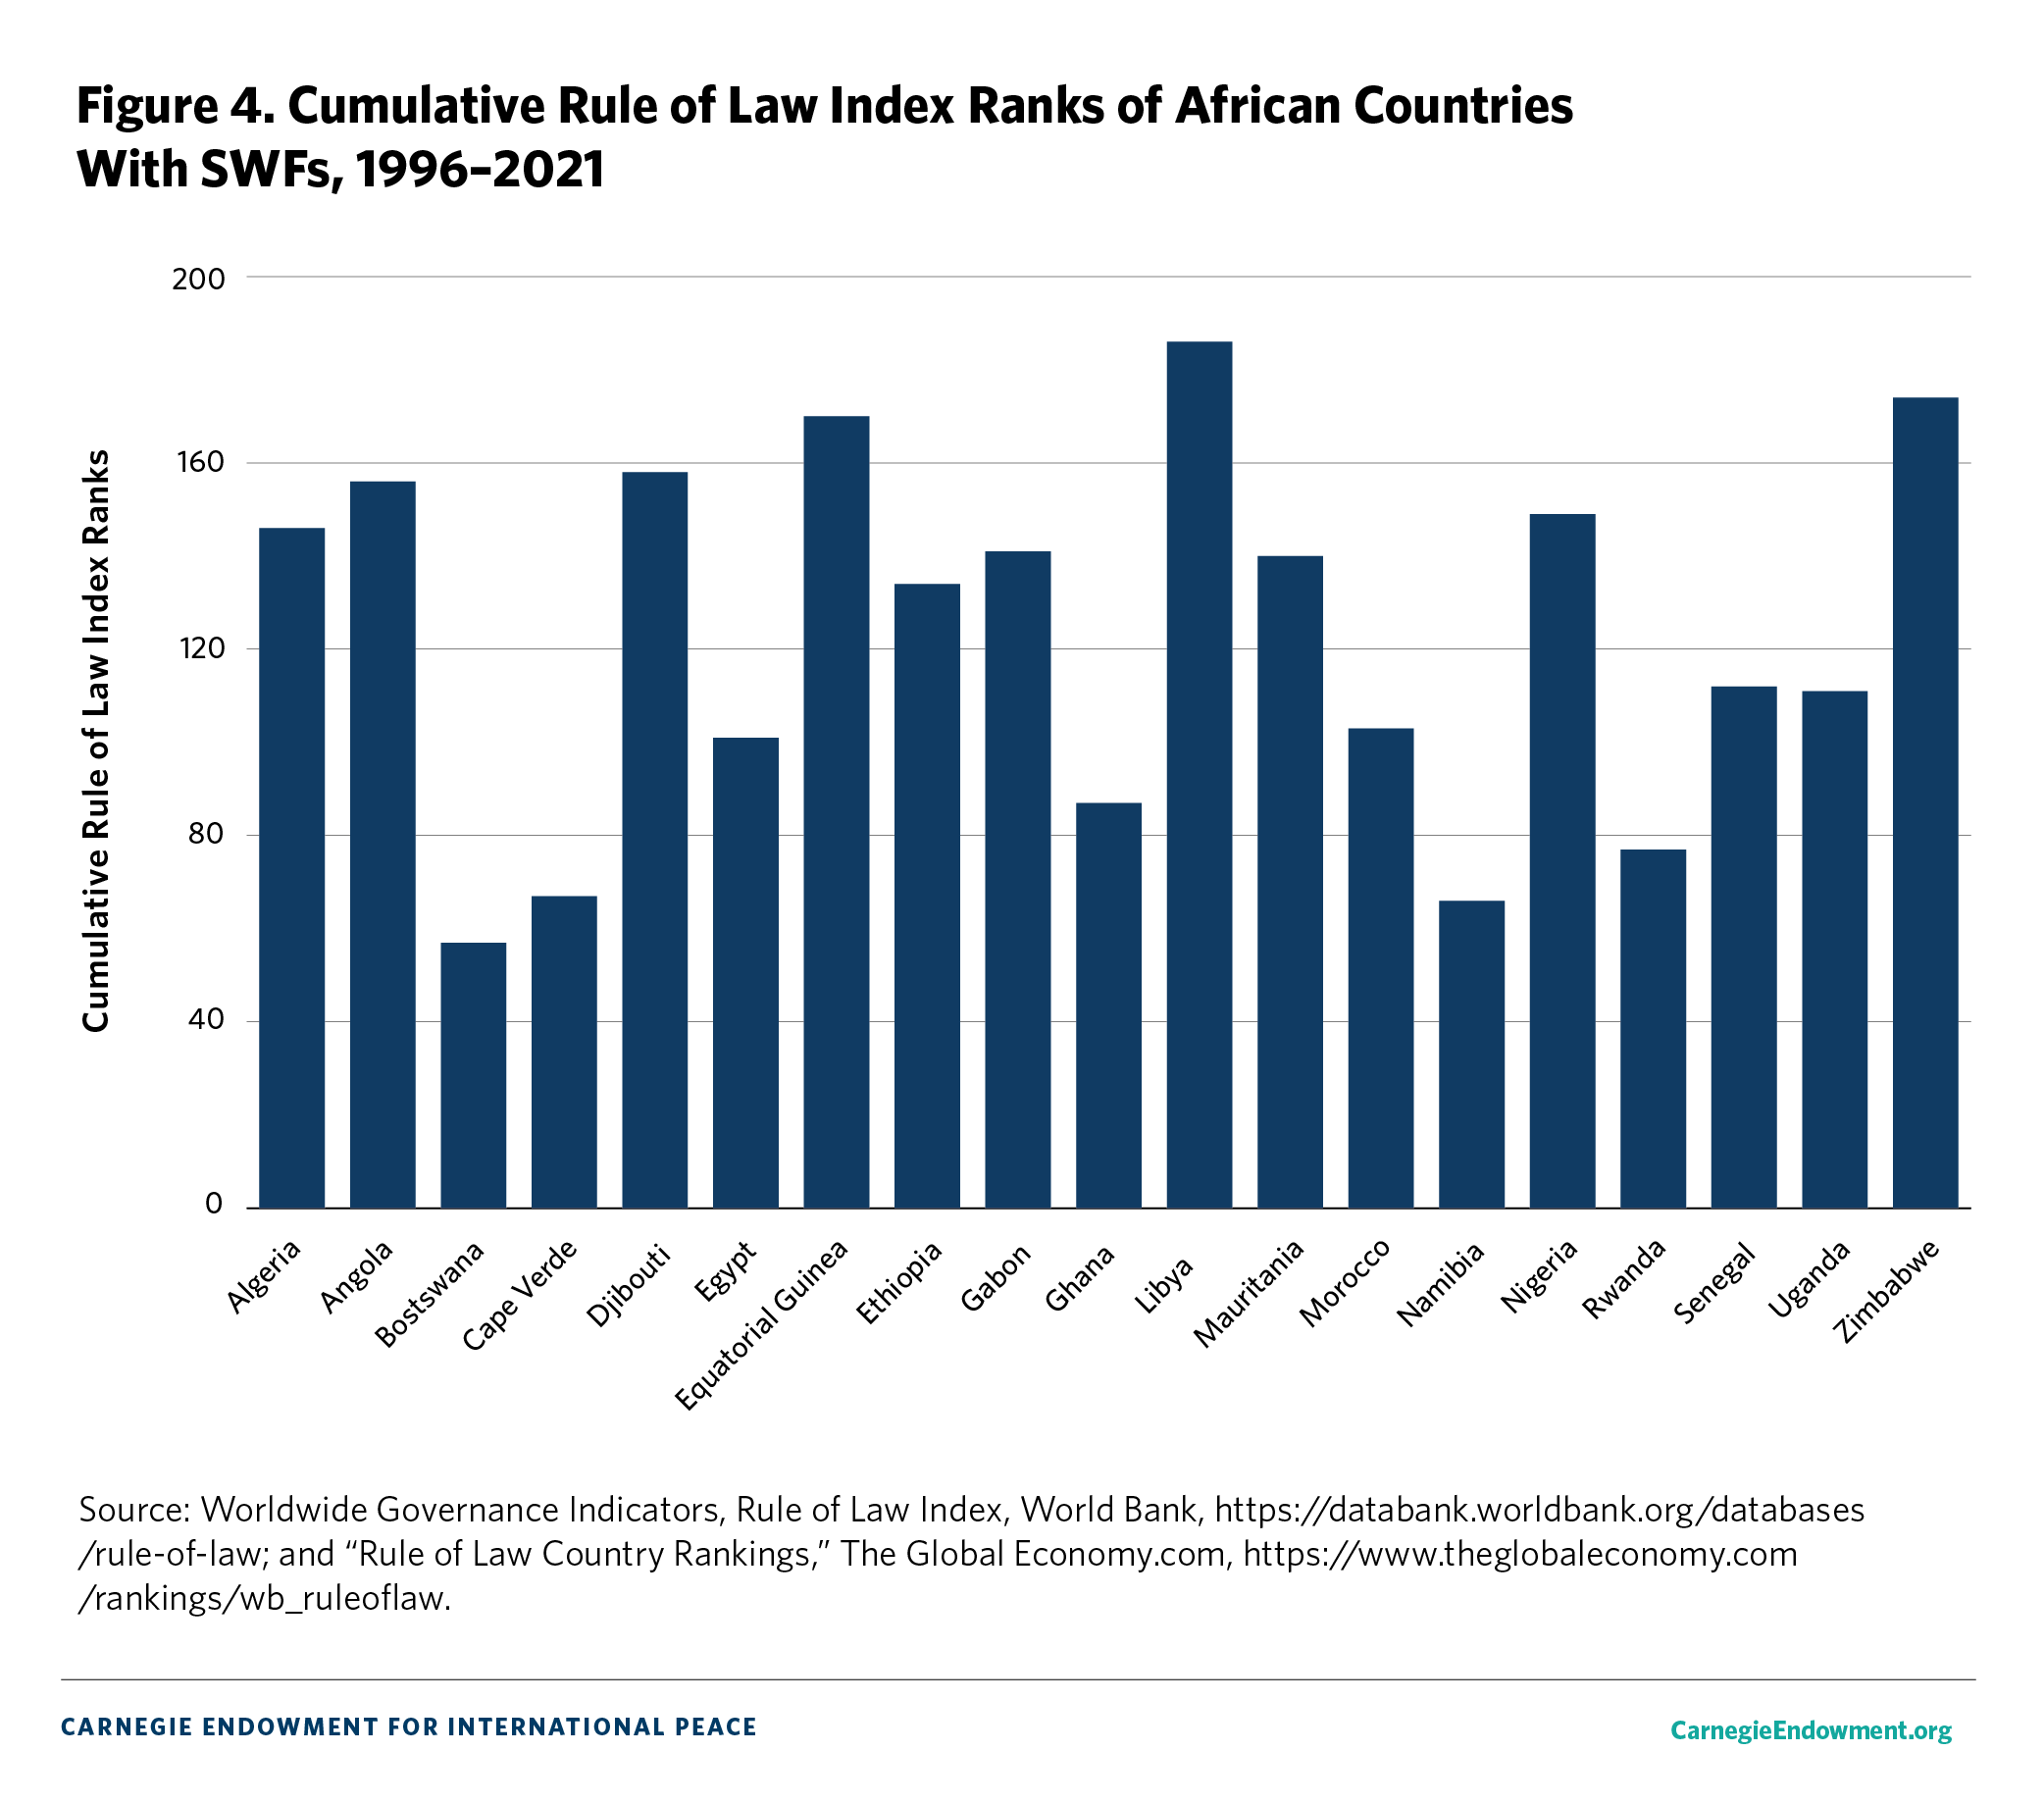 Figure 4: Rule of Law Index